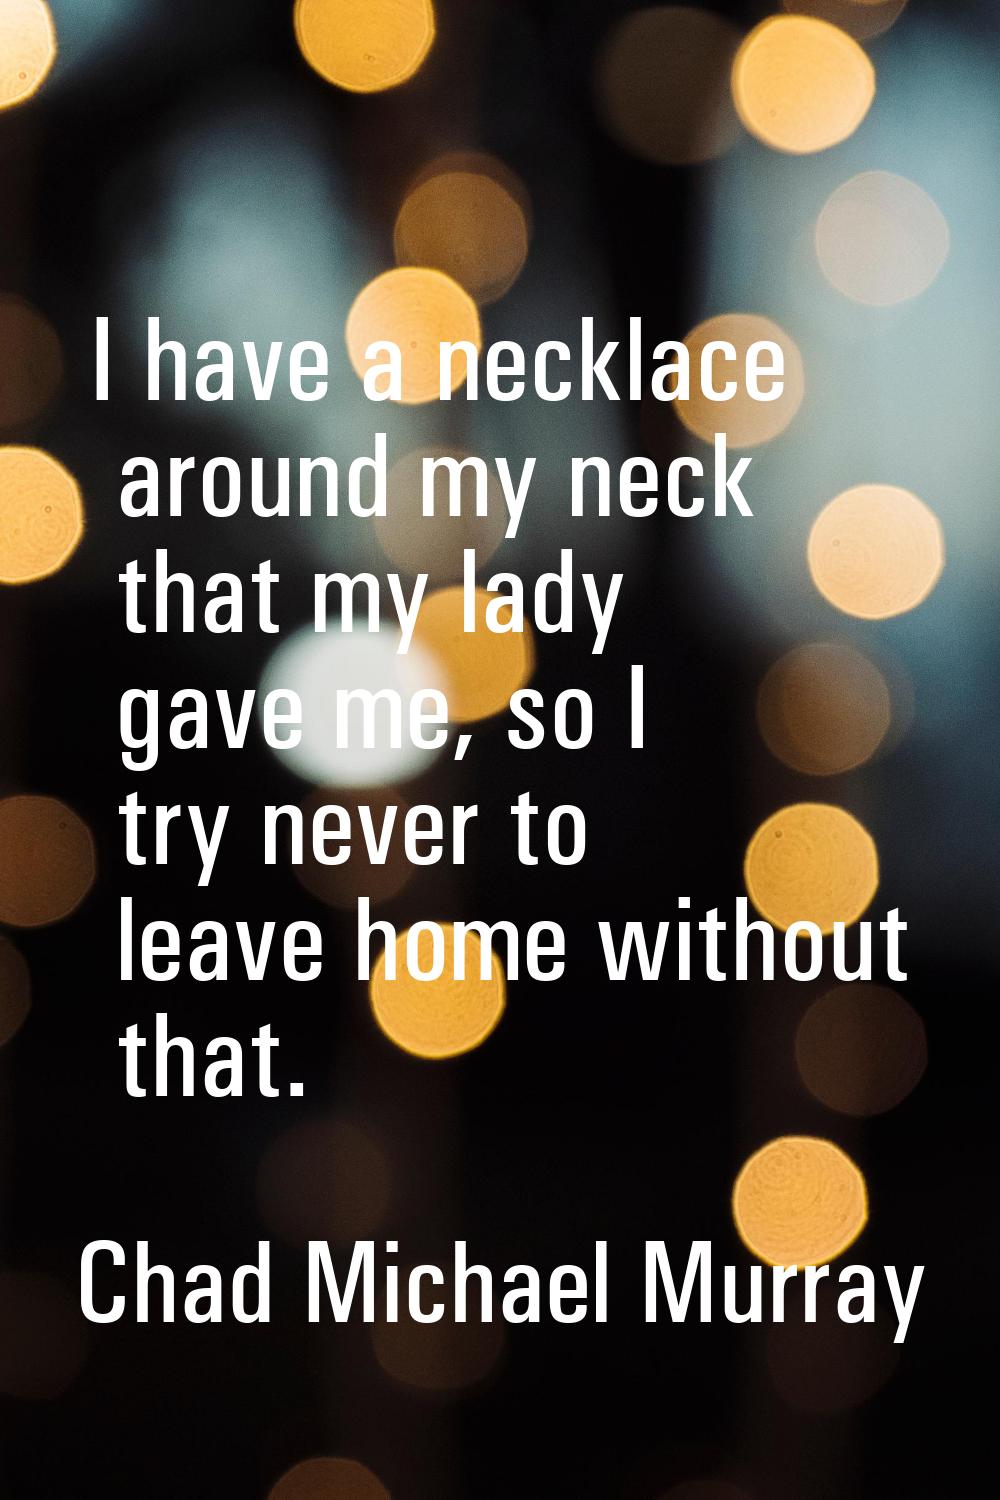 I have a necklace around my neck that my lady gave me, so I try never to leave home without that.